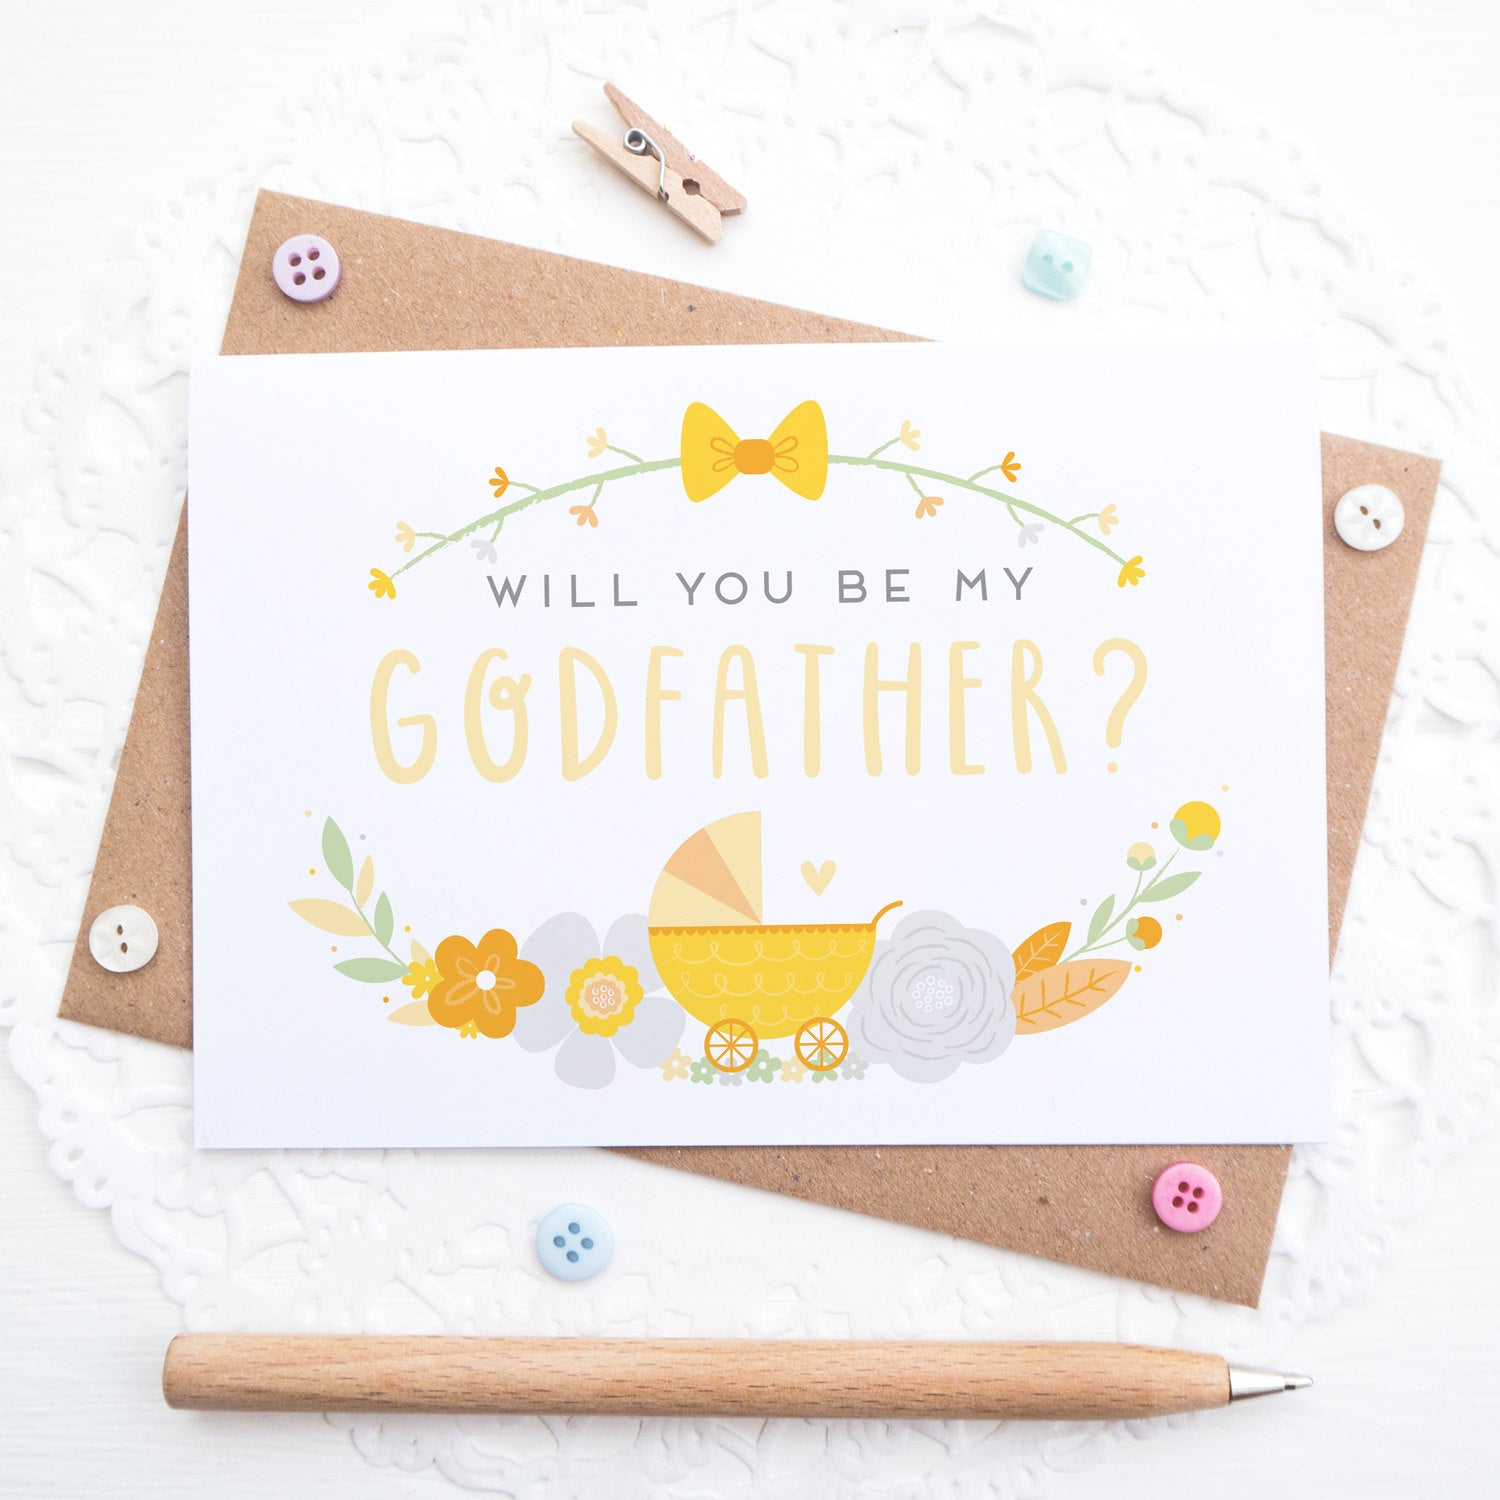 Will you be my Godfather card in yellow and orange